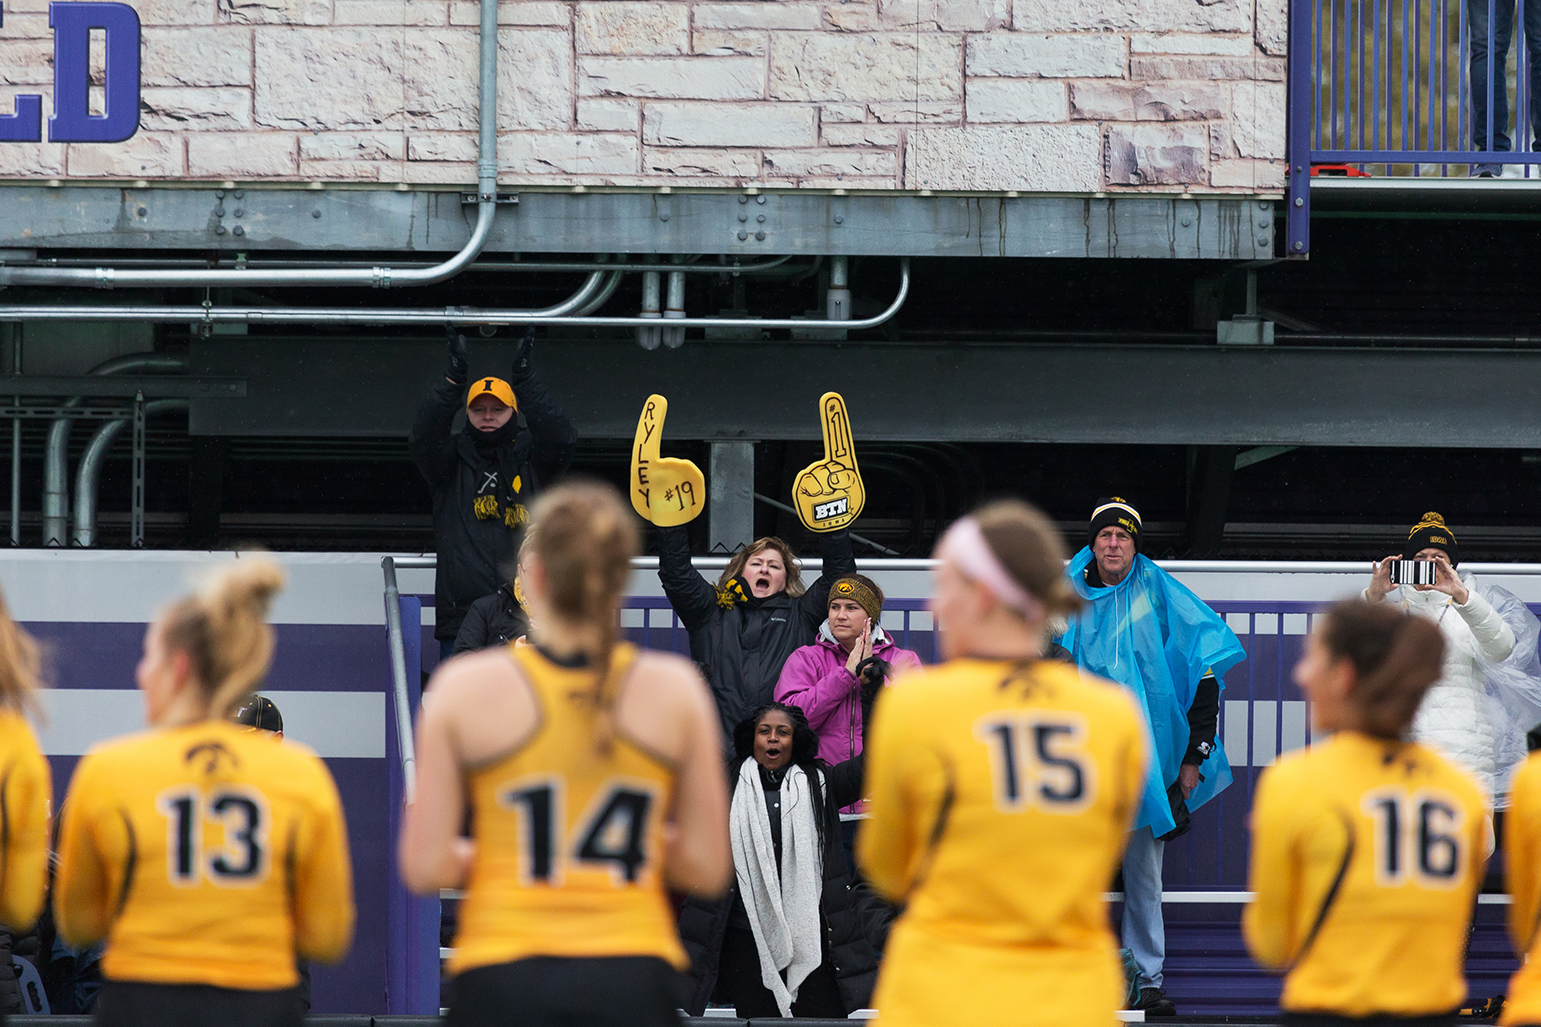  An Iowa fan cheers from the stands before the Championship Game in the Big Ten Field Hockey Tournament at Lakeside Field in Evanston, IL on Sunday, Nov. 3, 2018. The no. 2 ranked Terrapins defeated the no. 8 ranked Hawkeyes 2-1.  